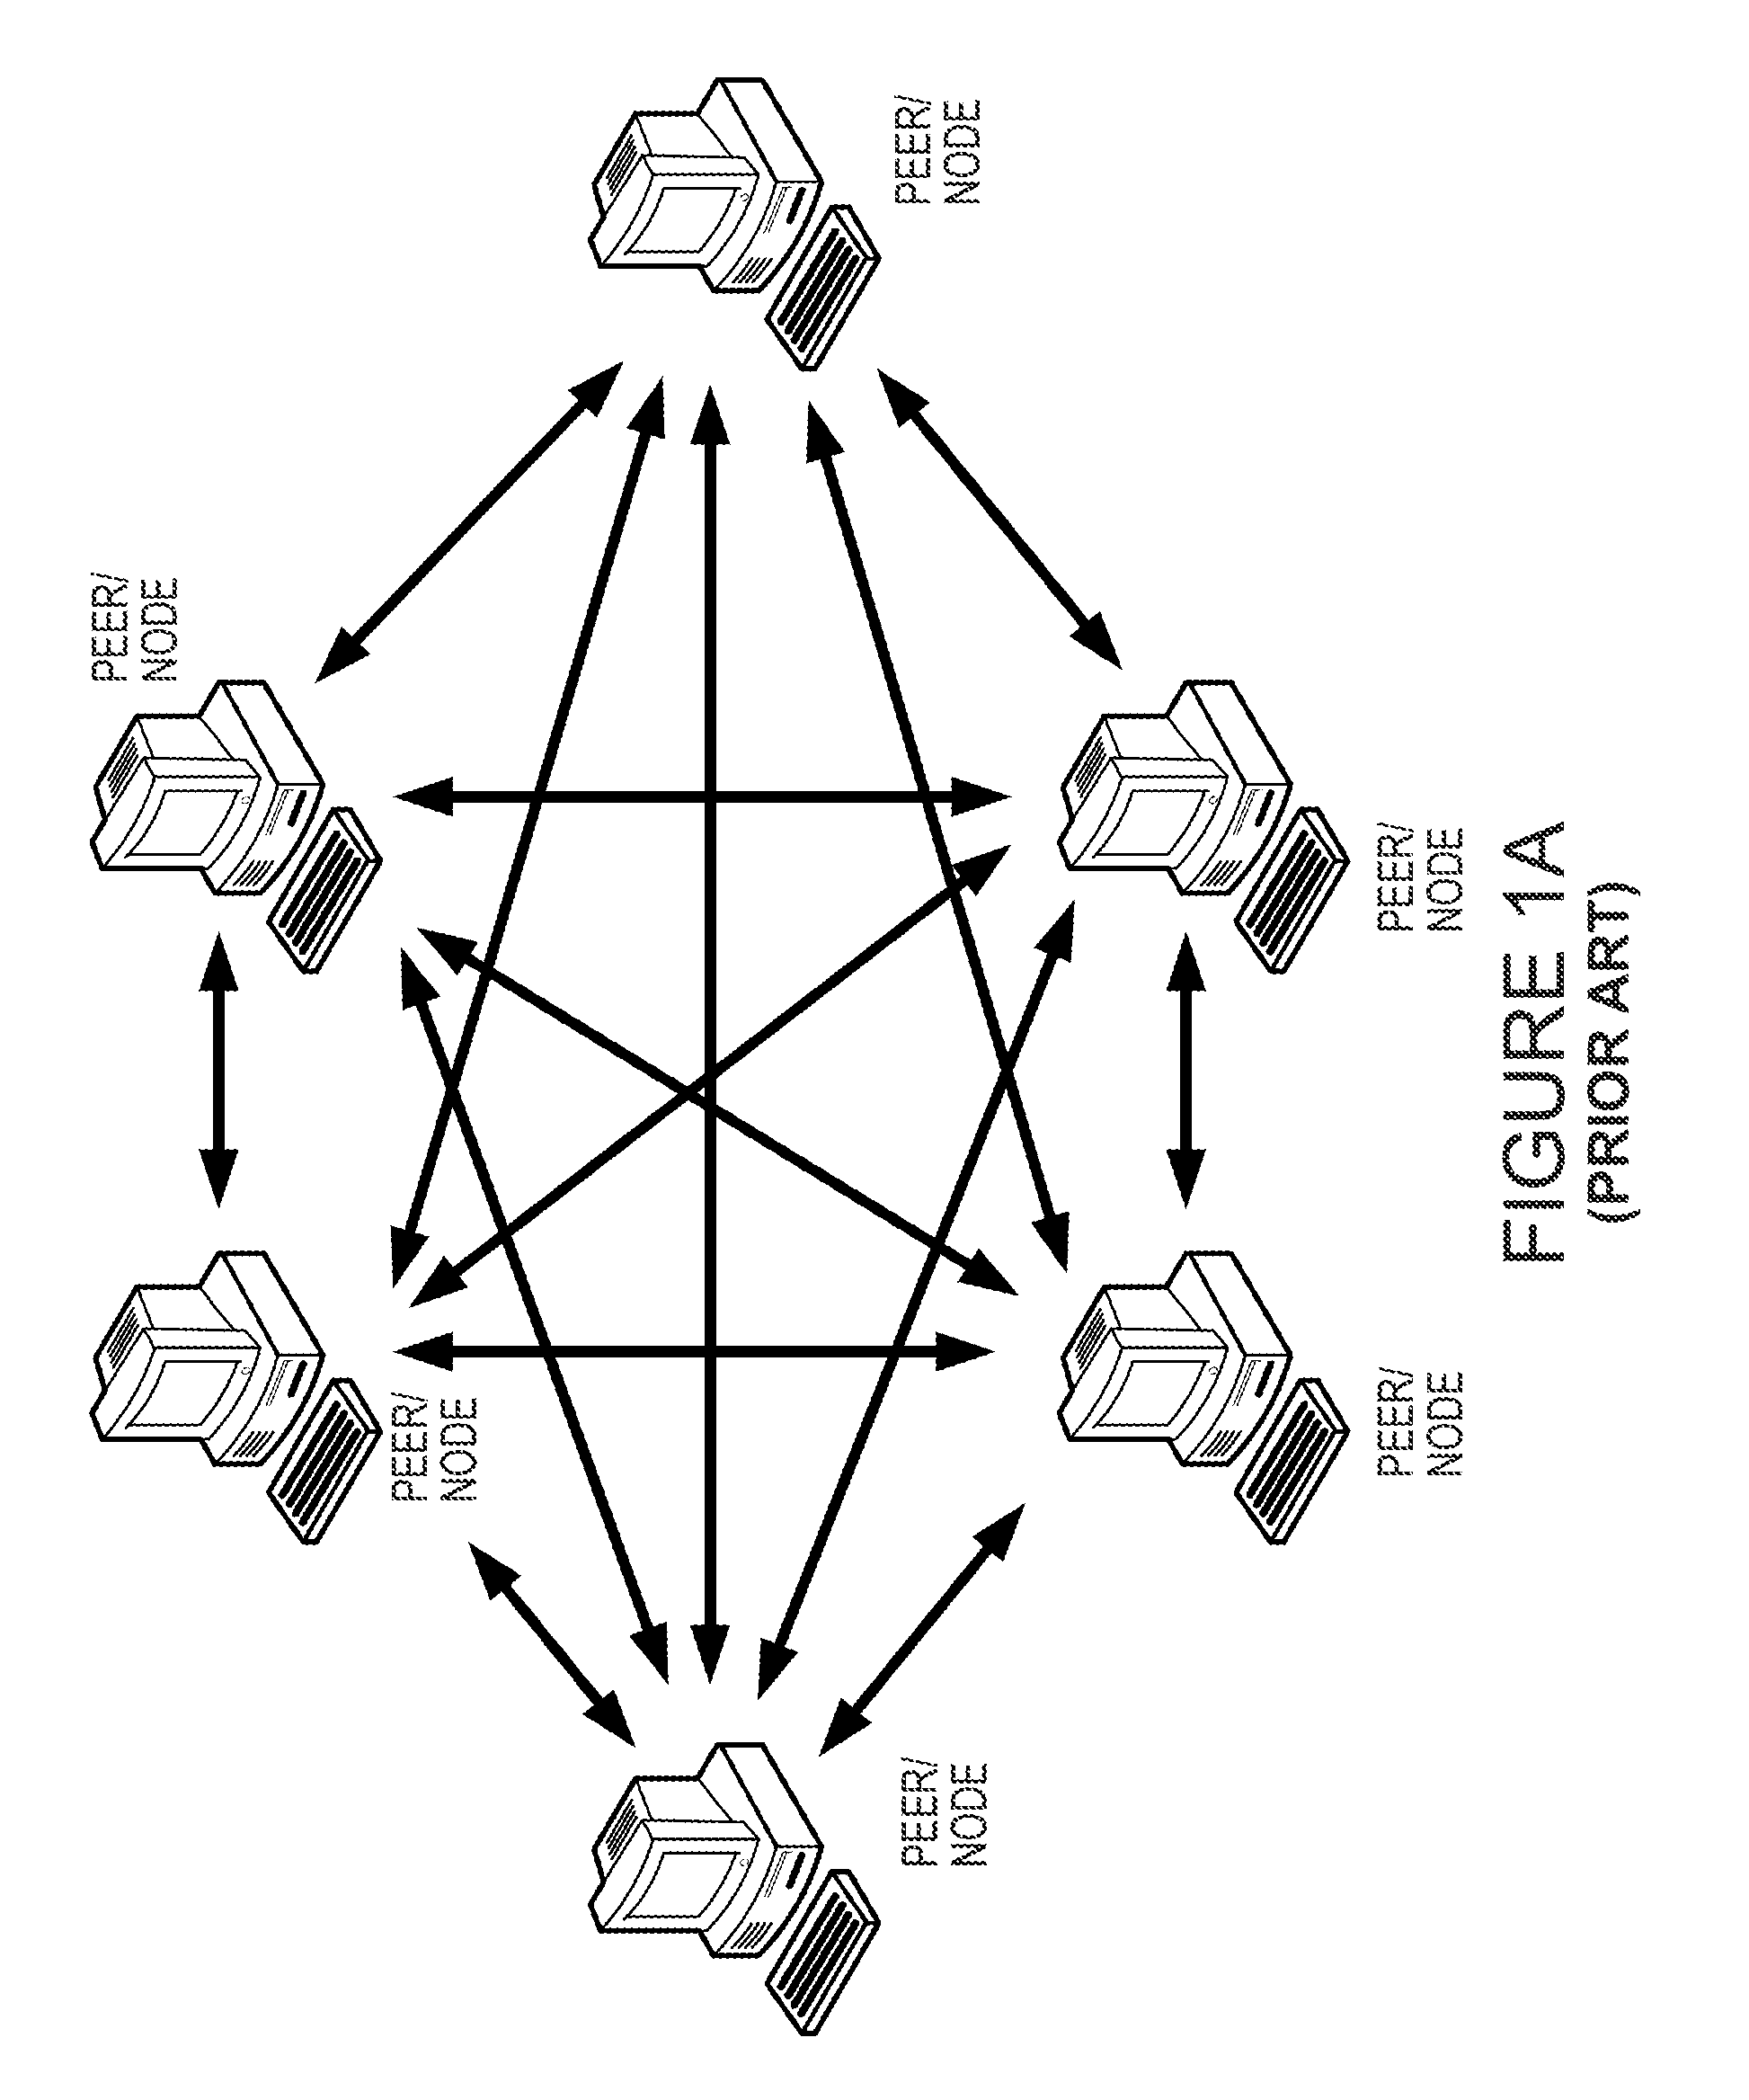 System and method for distributed index searching of electronic content